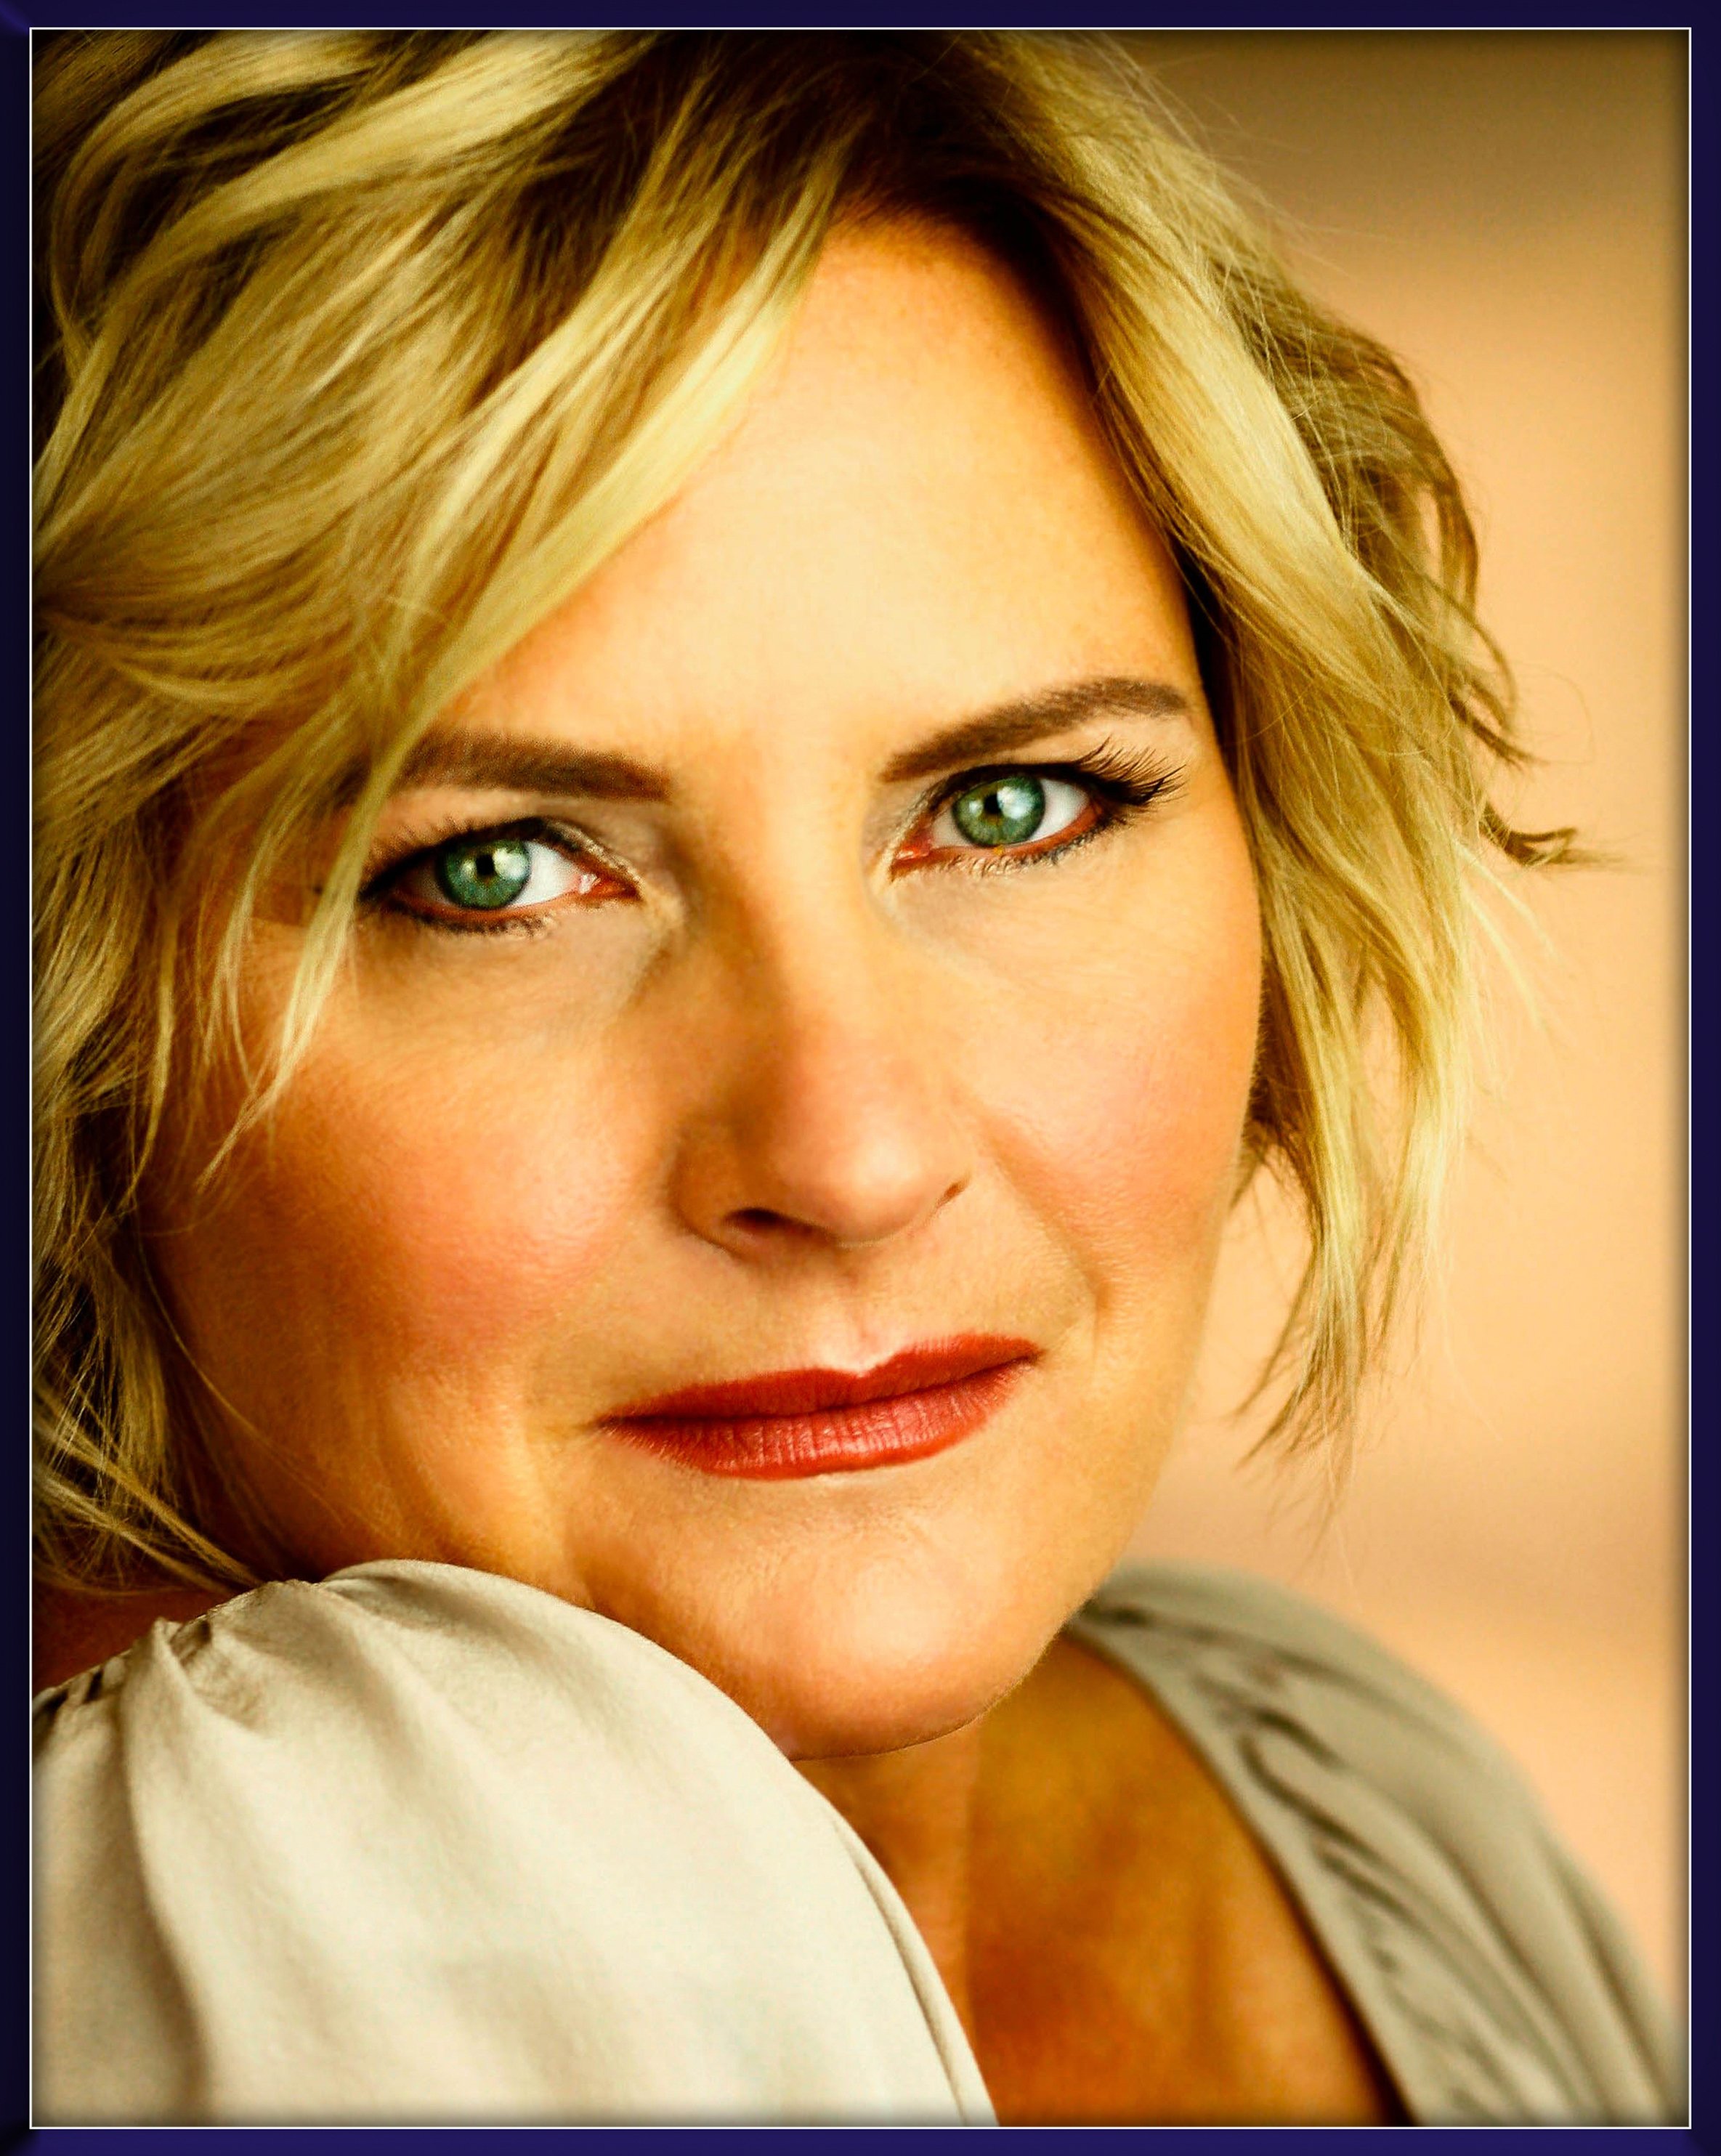 denise crosby young